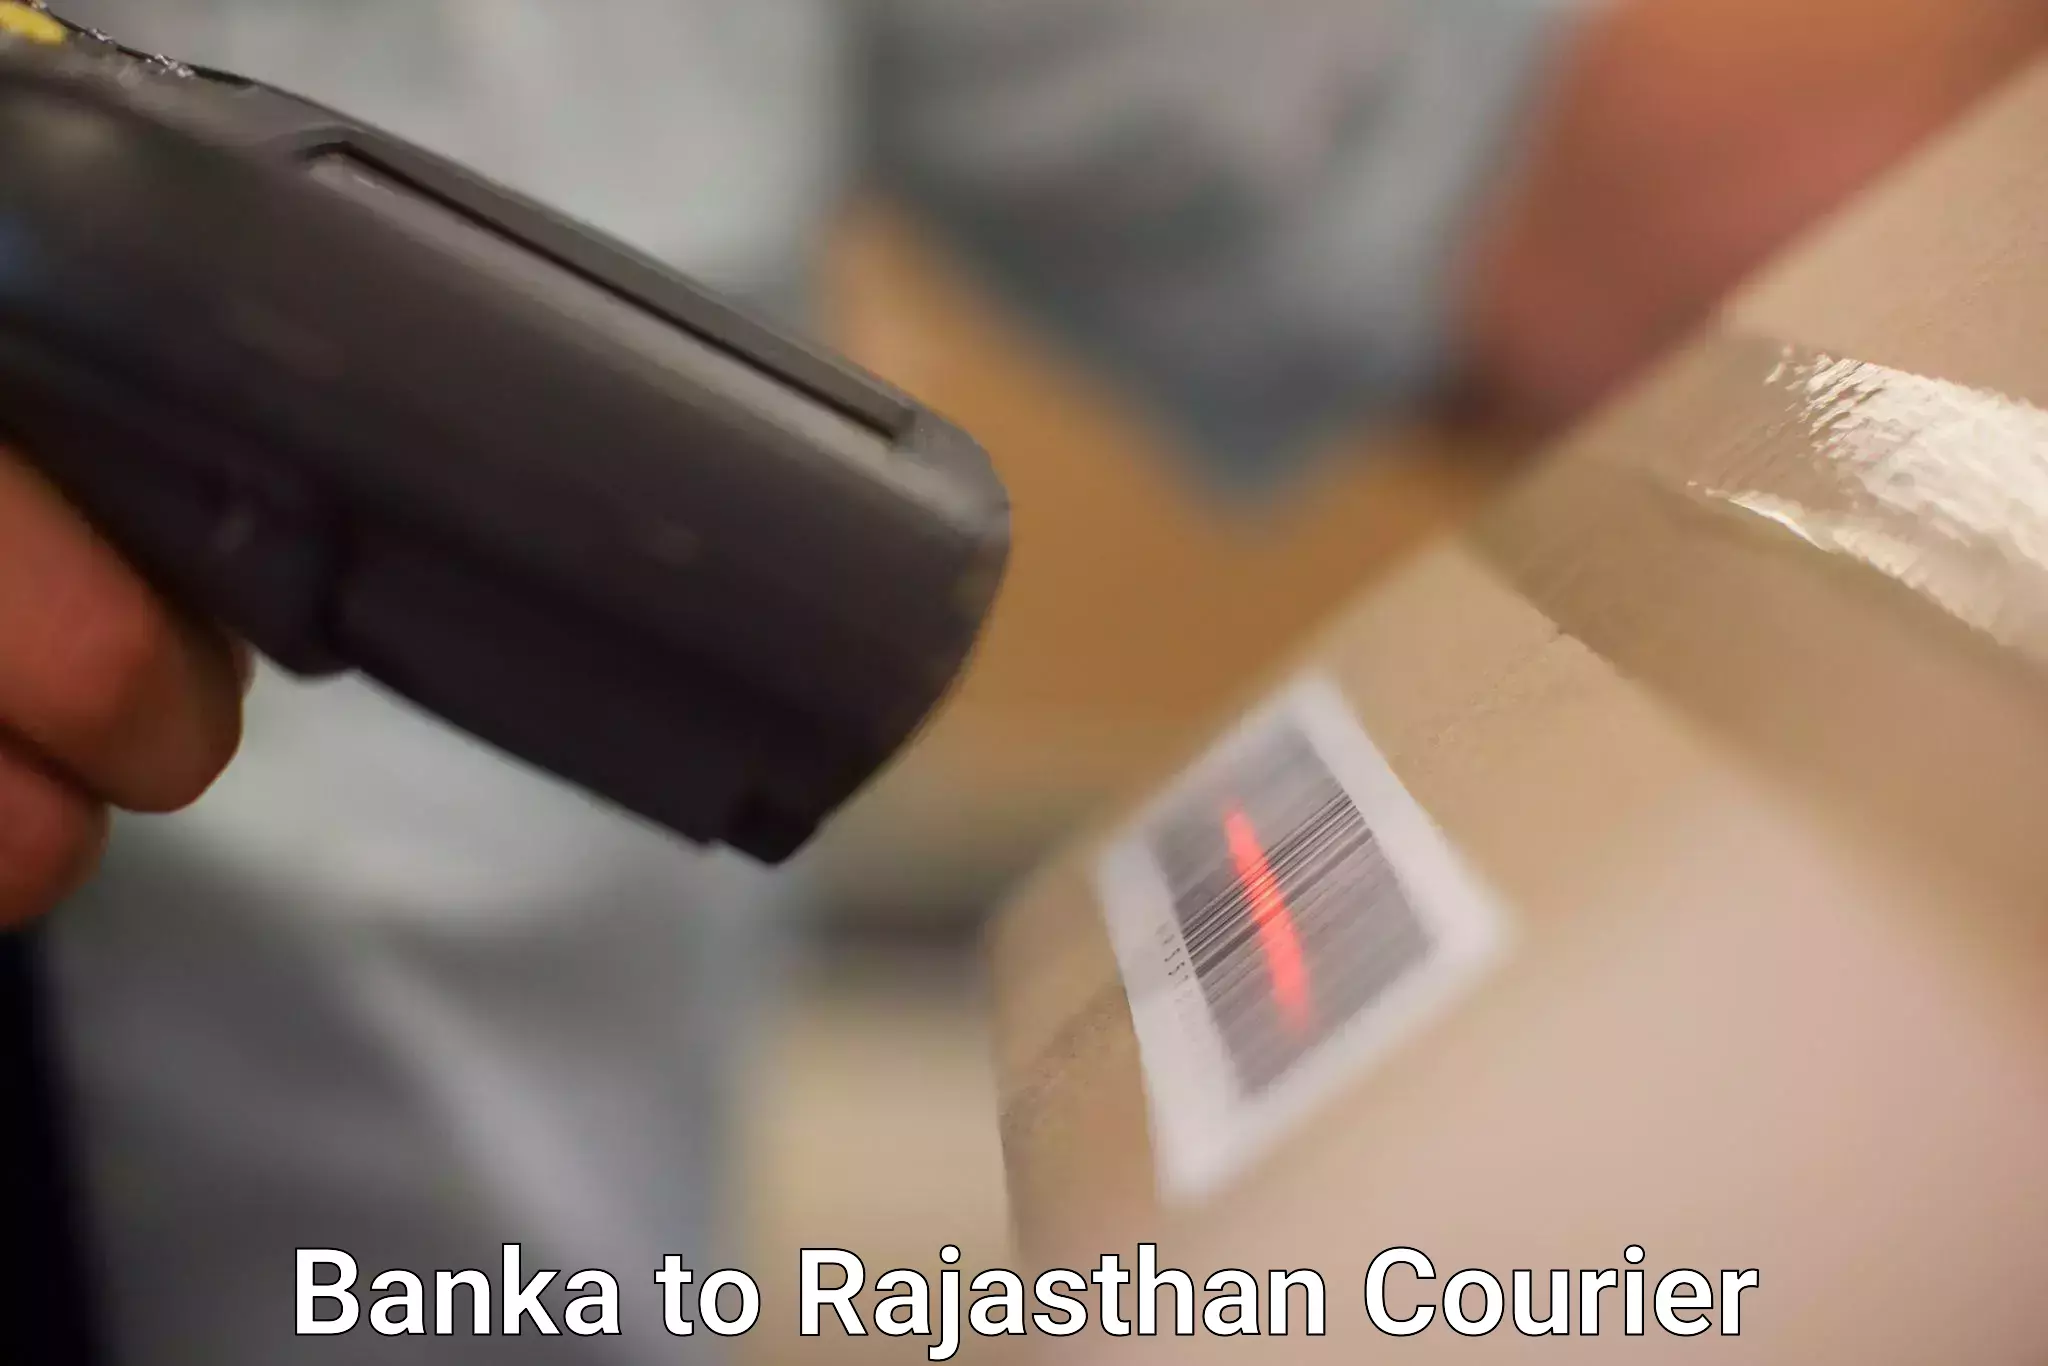 High-priority parcel service Banka to Rajasthan